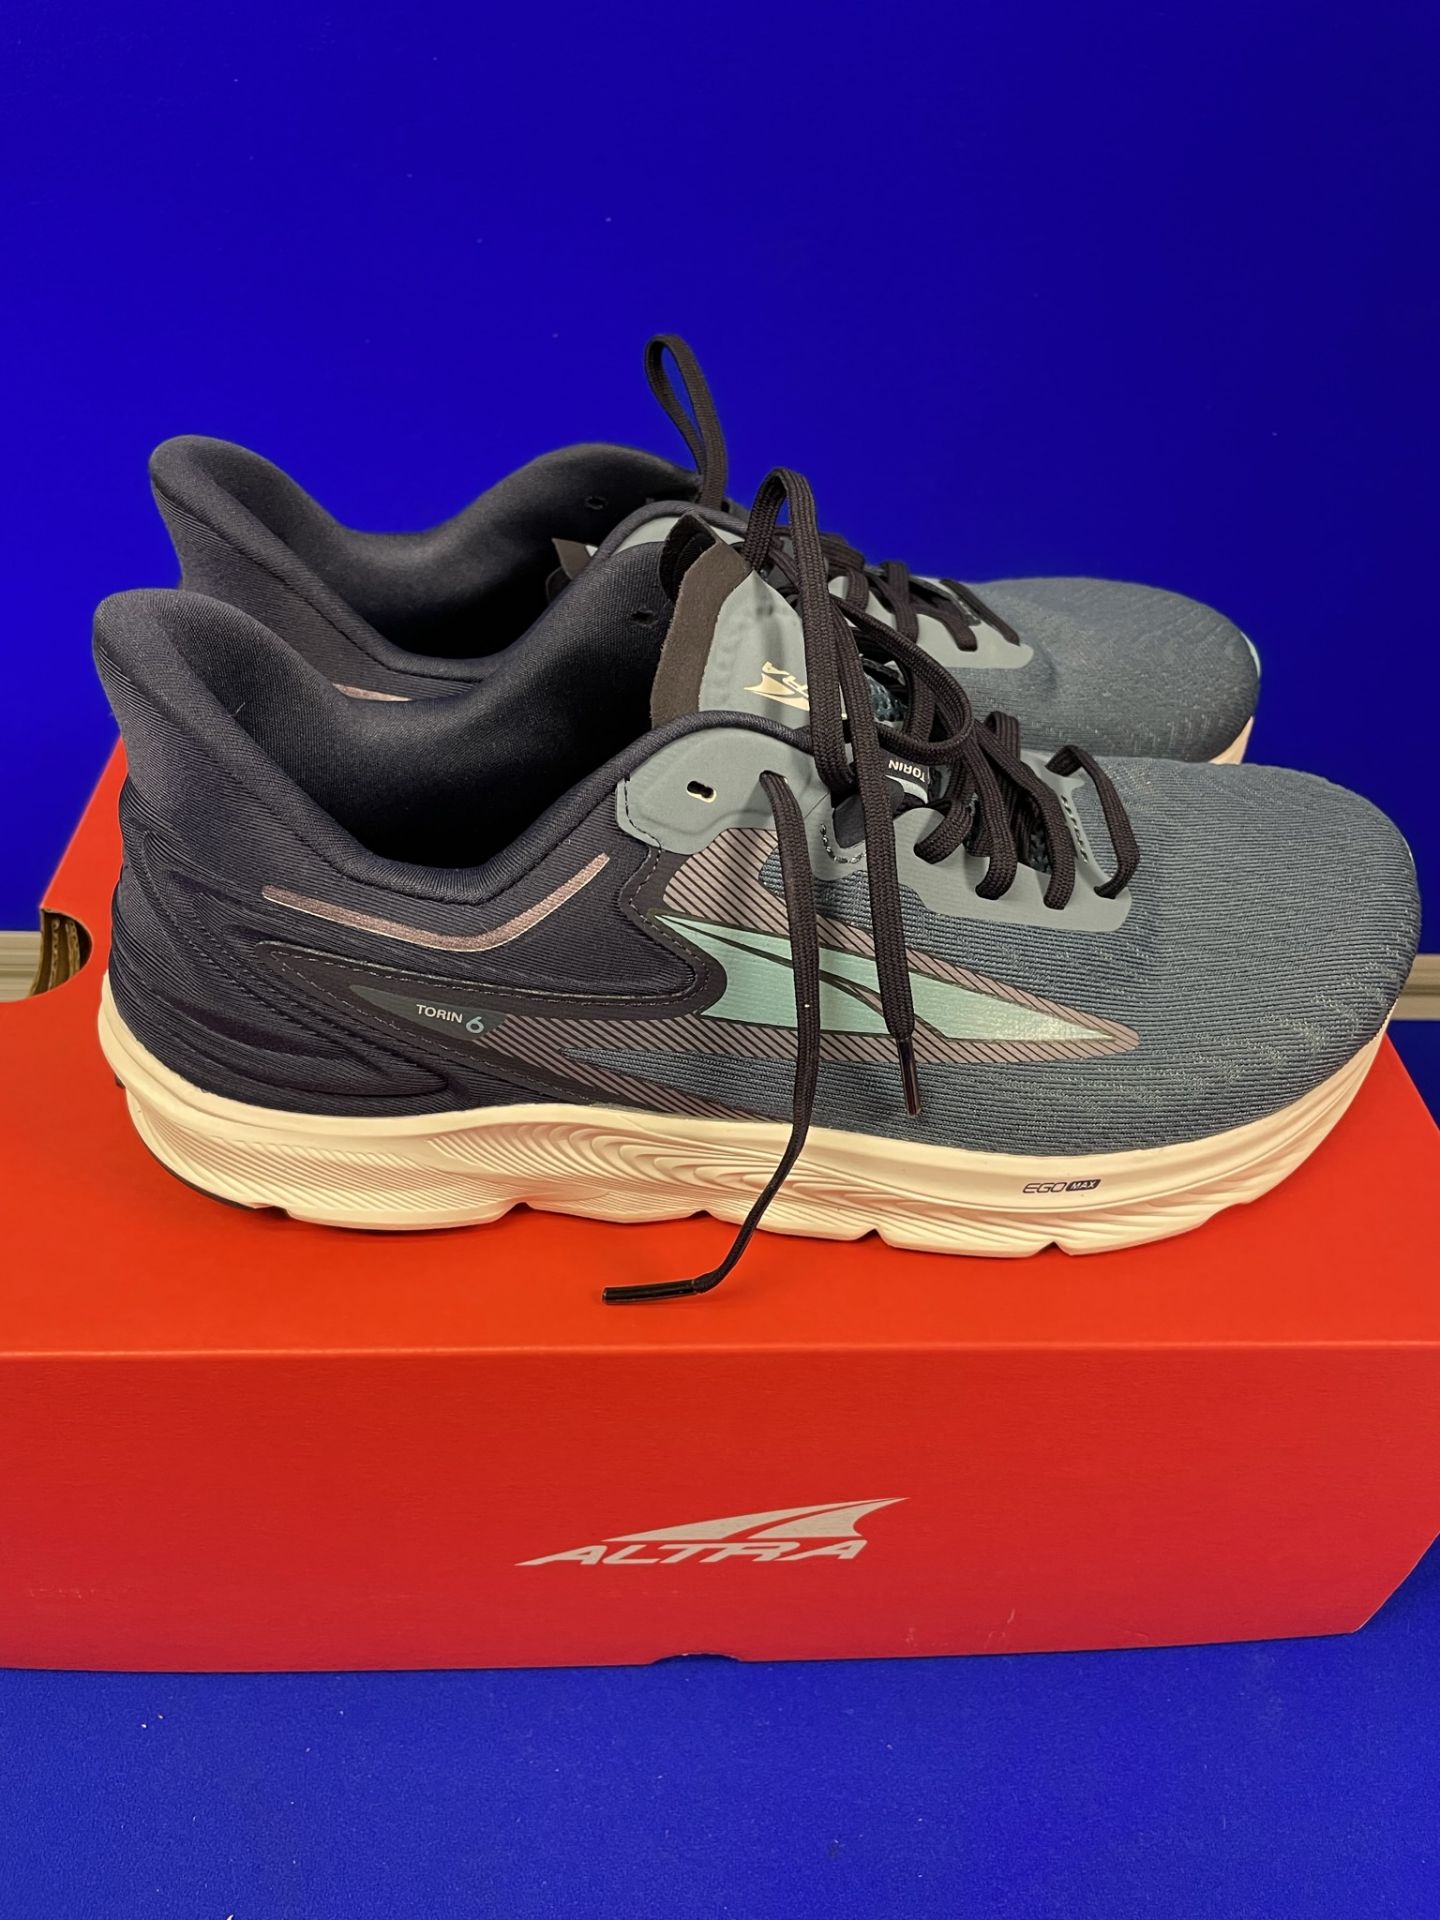 Altra M Torin 6 Men's Trainers | UK 8.5 - Image 3 of 4